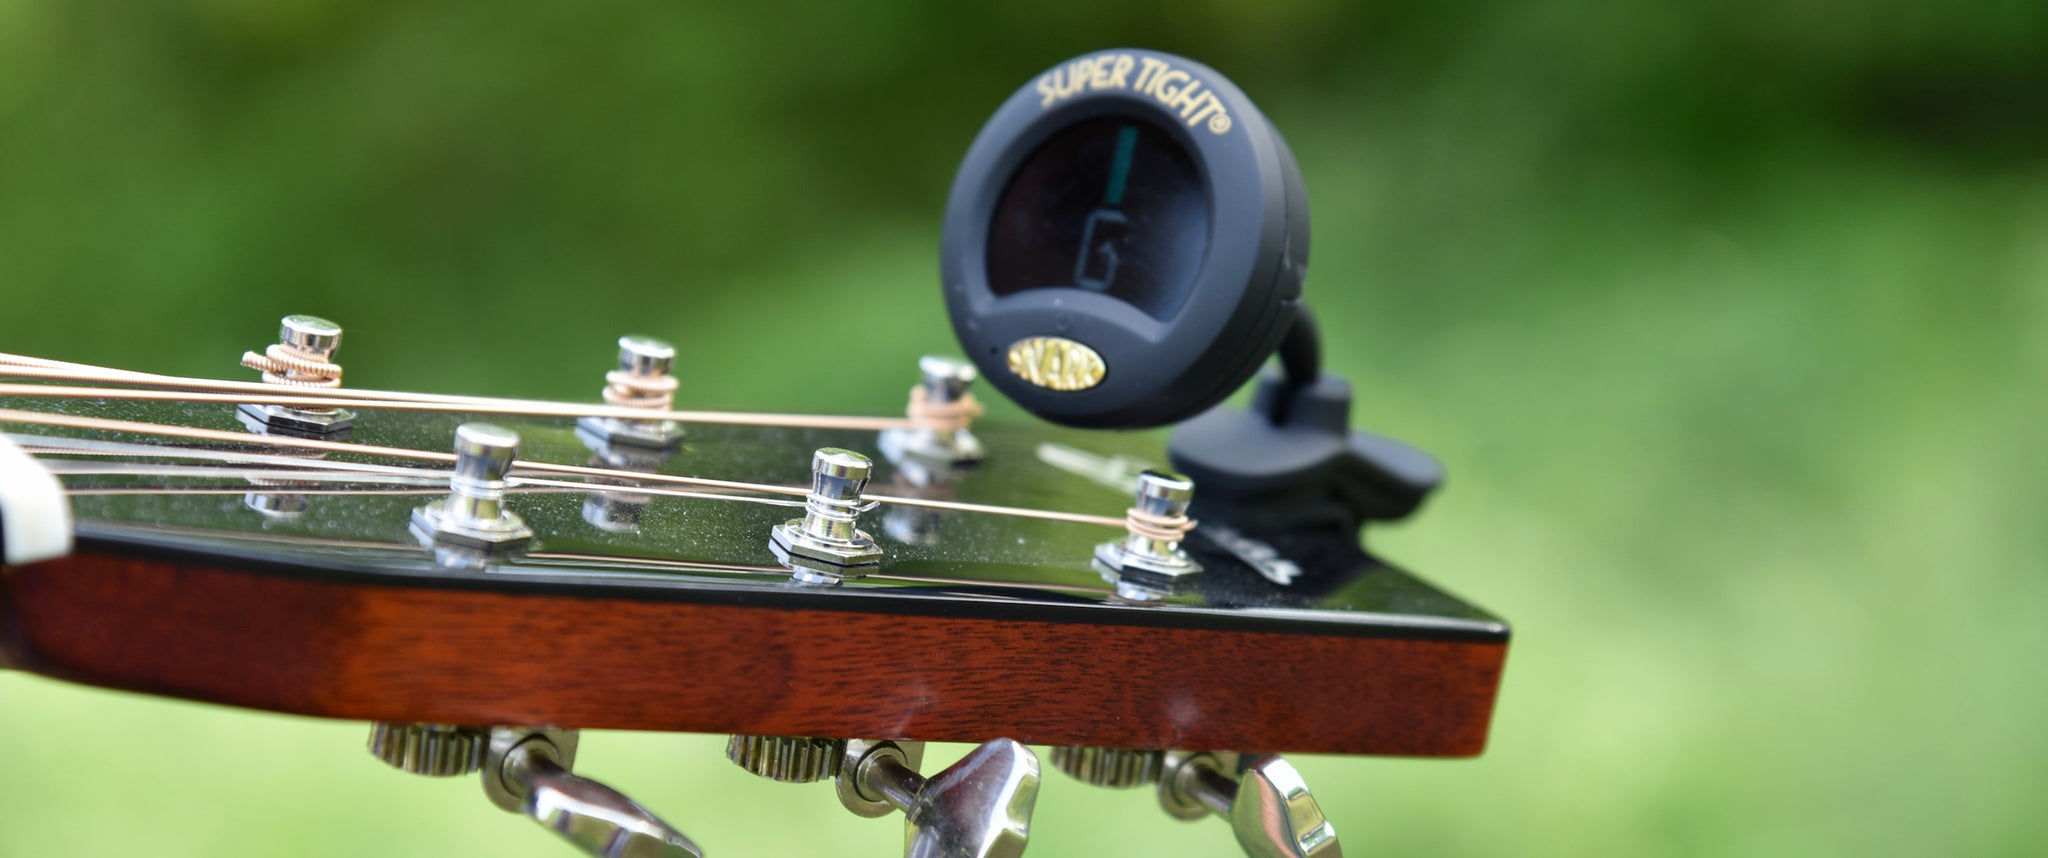 Which Snark Tuner Should I Buy? - Discussion Forums - Banjo Hangout